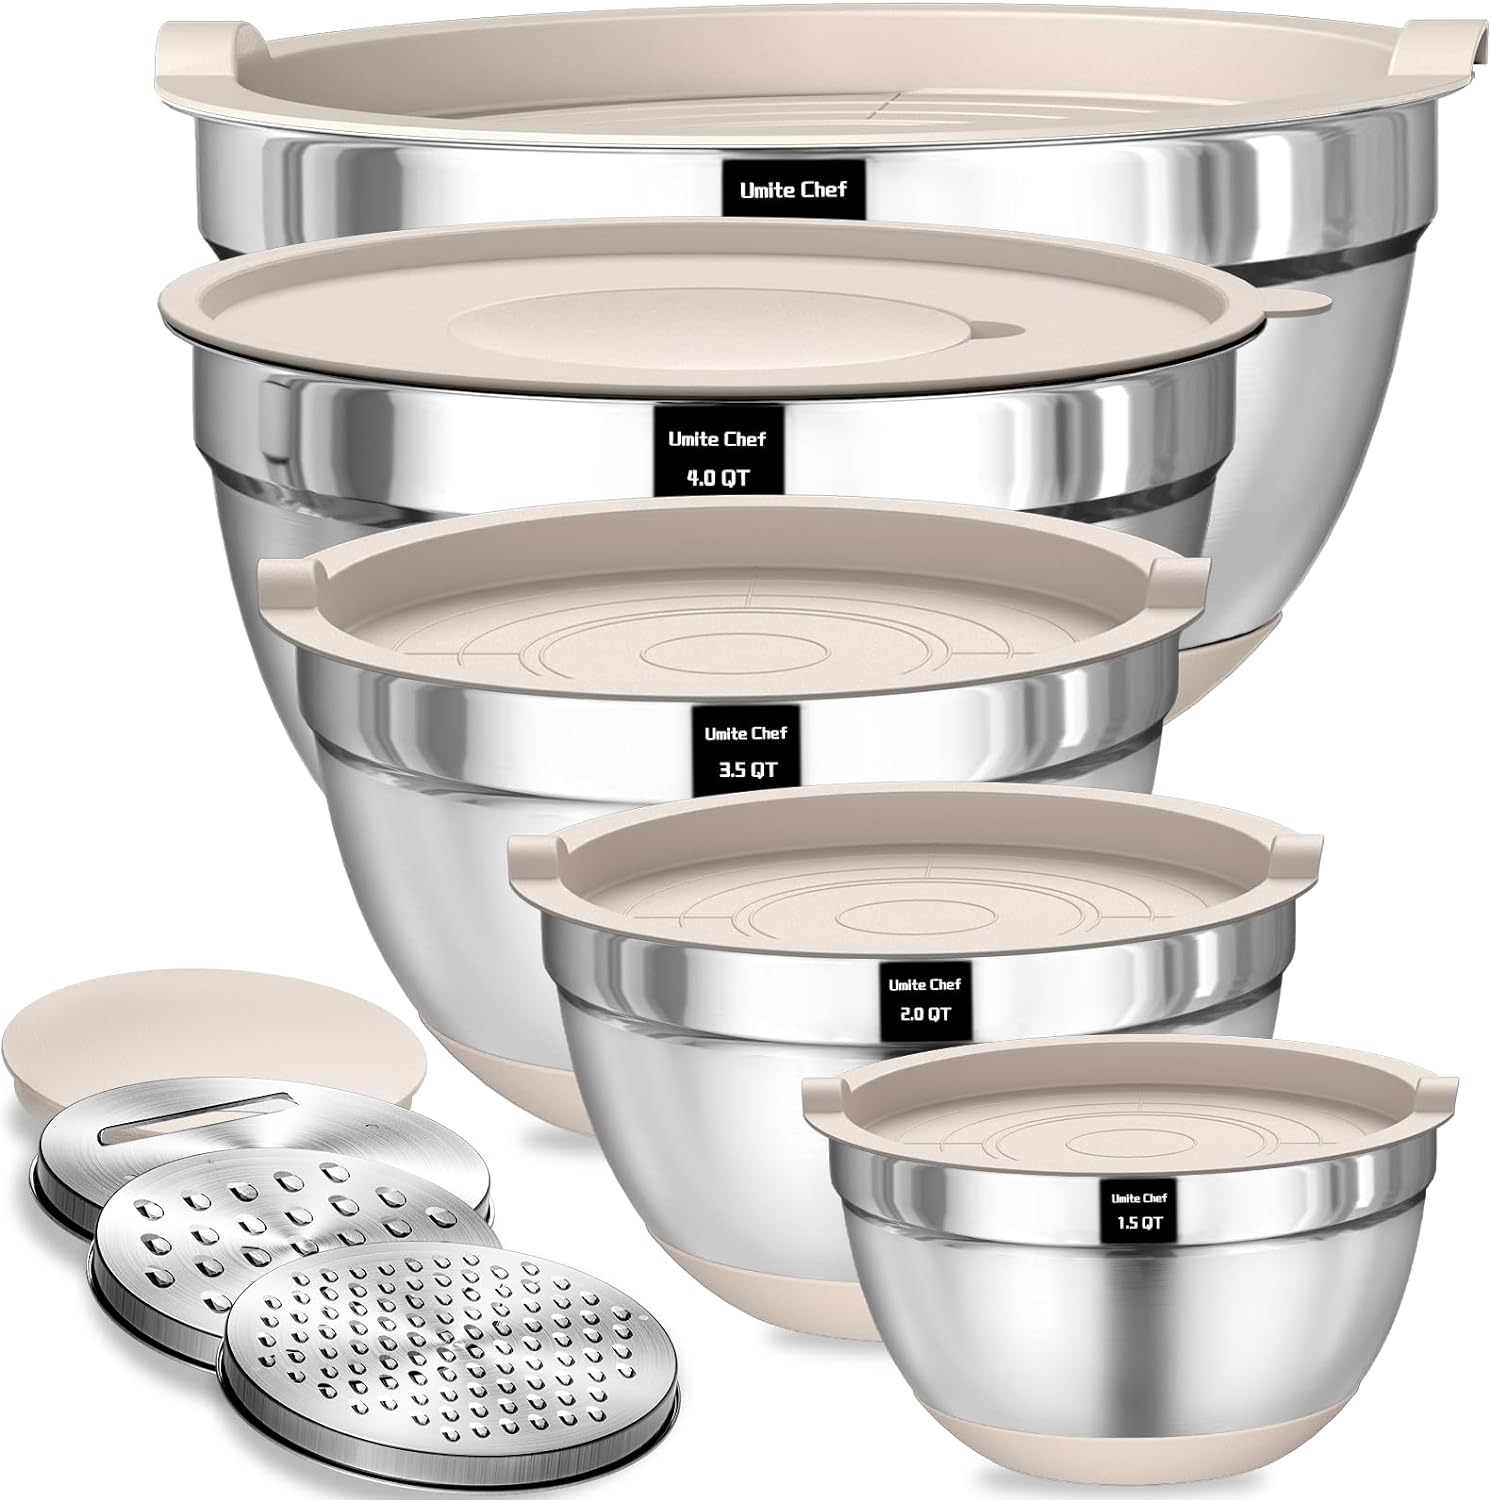  UPKOCH mixing bowls household vegetable washing basin extra  large mixing bowl stainless bowls big mixing bowl flat bottom basin metal  bowls salad 28c Stainless steel laundry tub: Home & Kitchen